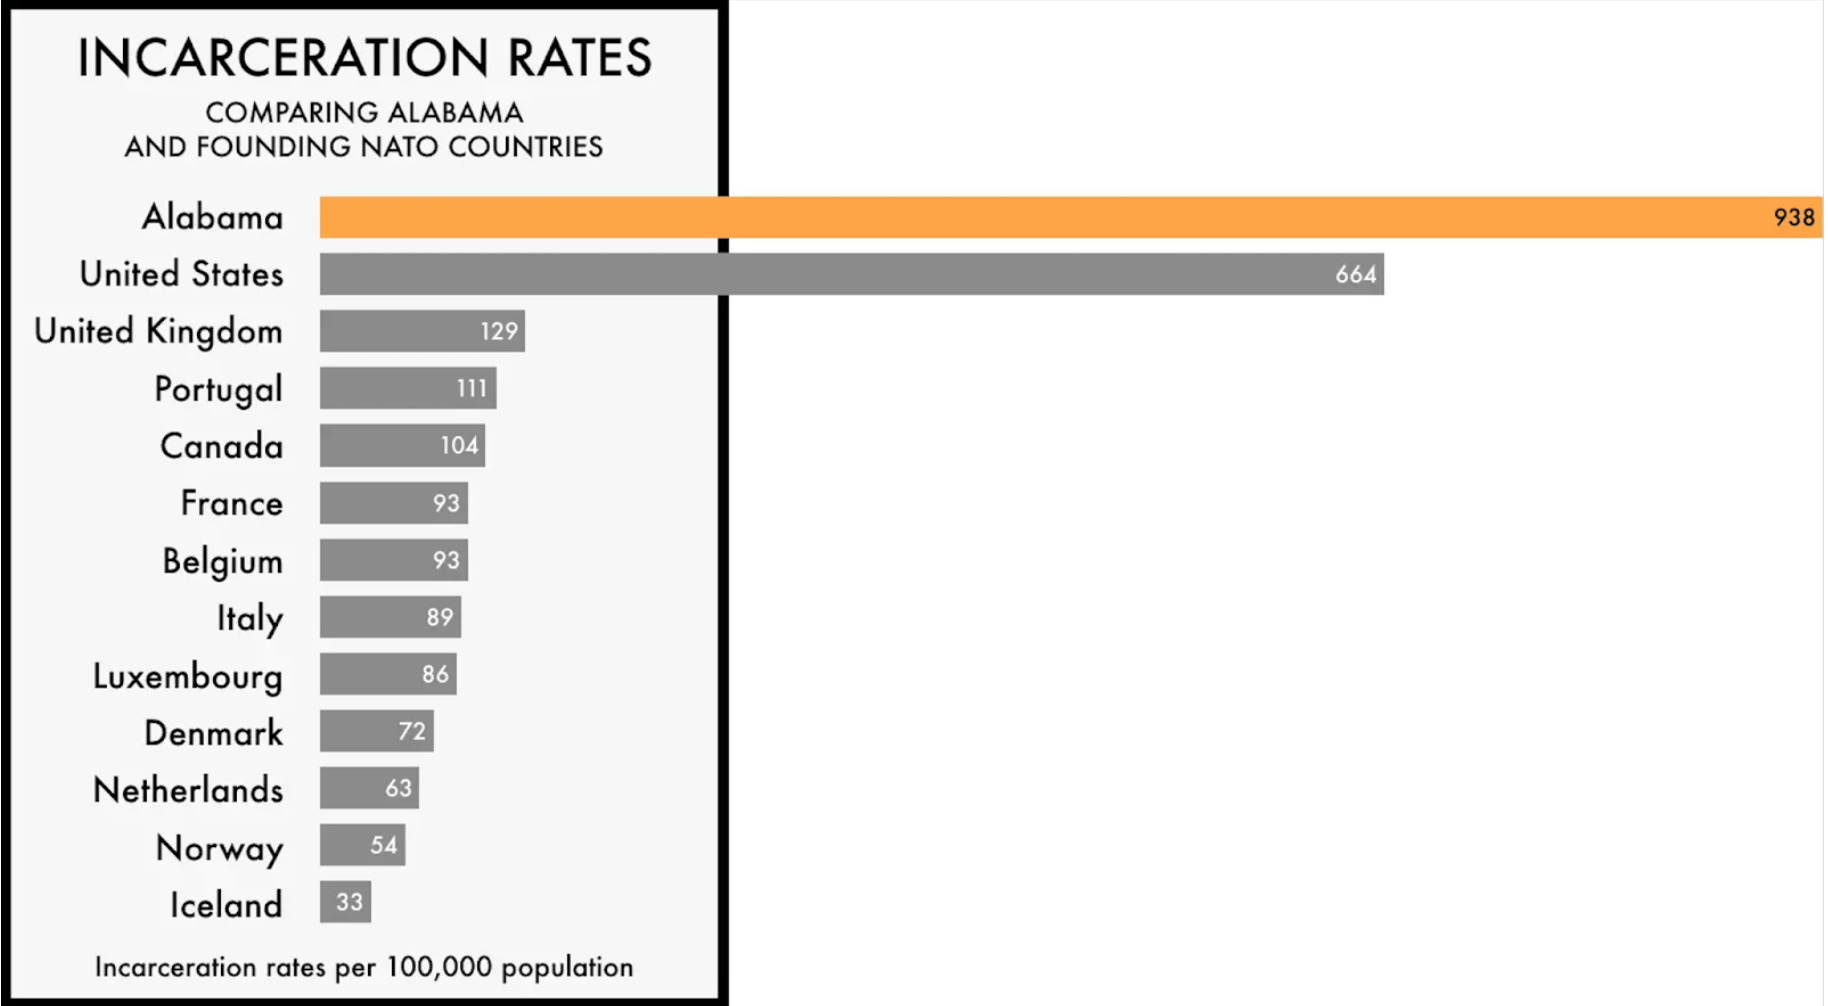 A graphic labeled “Incarceration Rates: Comparing Alabama and Founding NATO Countries.” The graphic is made of 13 horizontal bars representing the number of people per 100,000 that are incarcerated in each place. The first two bars, representing Alabama and the United States, are so long that they extend outside of the graphic. The specific numbers per place are as follows: Alabama - 938. United States - 664. United Kingdom - 129. Portugal - 111. Canada - 104. France - 93. Belgium - 93. Italy - 89. Luxembourg - 86. Denmark - 72. Netherlands - 63. Norway - 54. Iceland - 33.